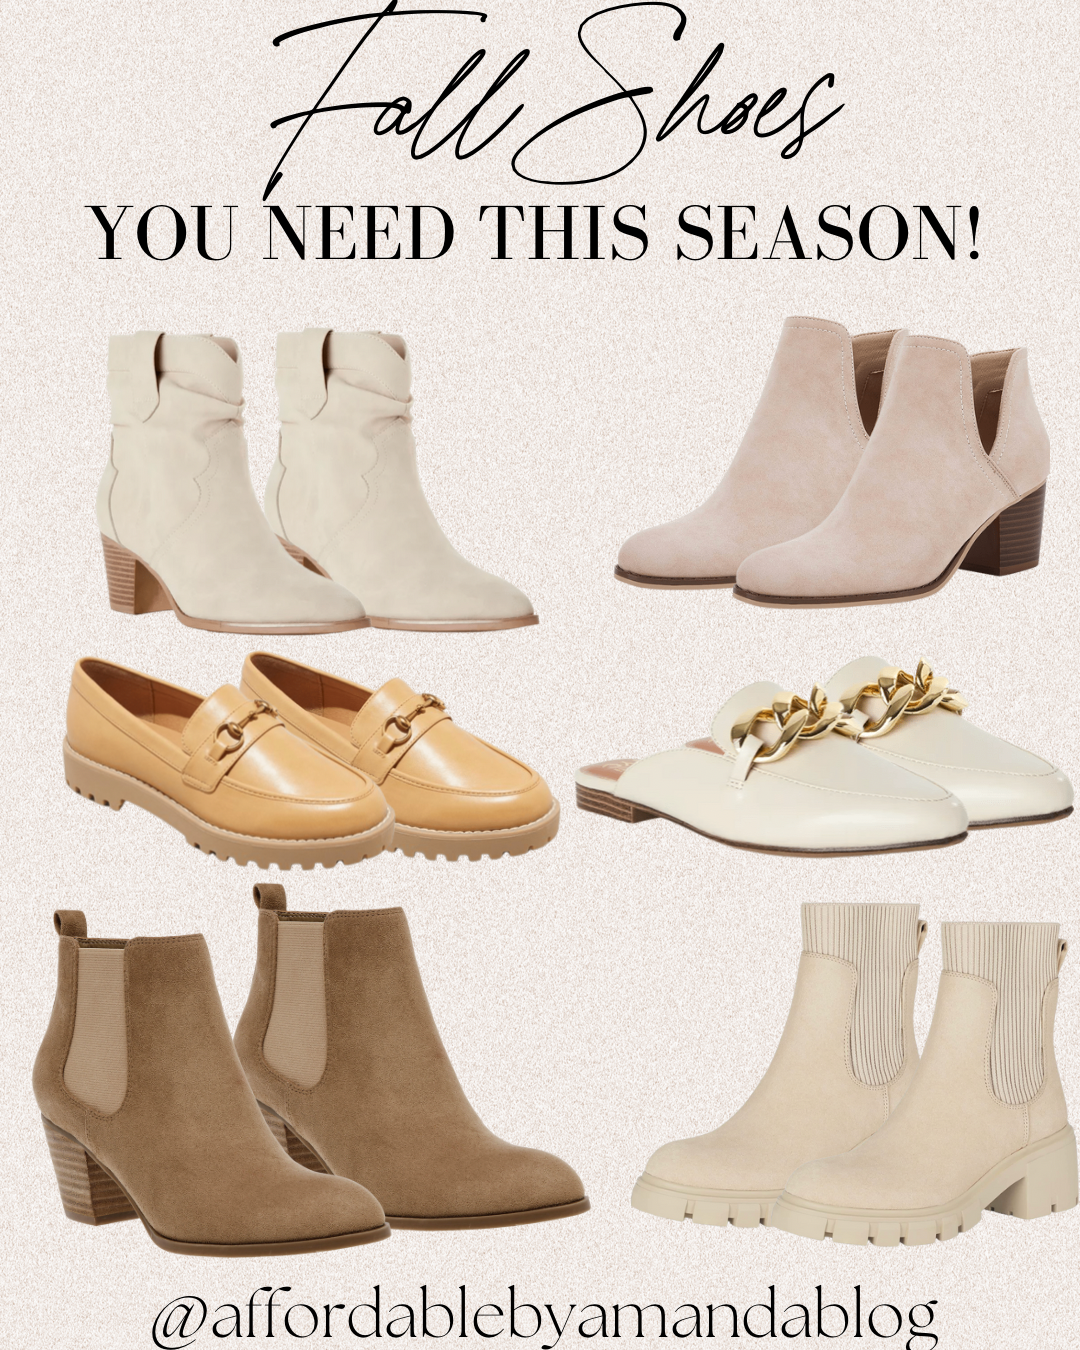 5 Fall 2022 Shoe Trends - Cute Fall Shoes for 2022 - Affordable by Amanda